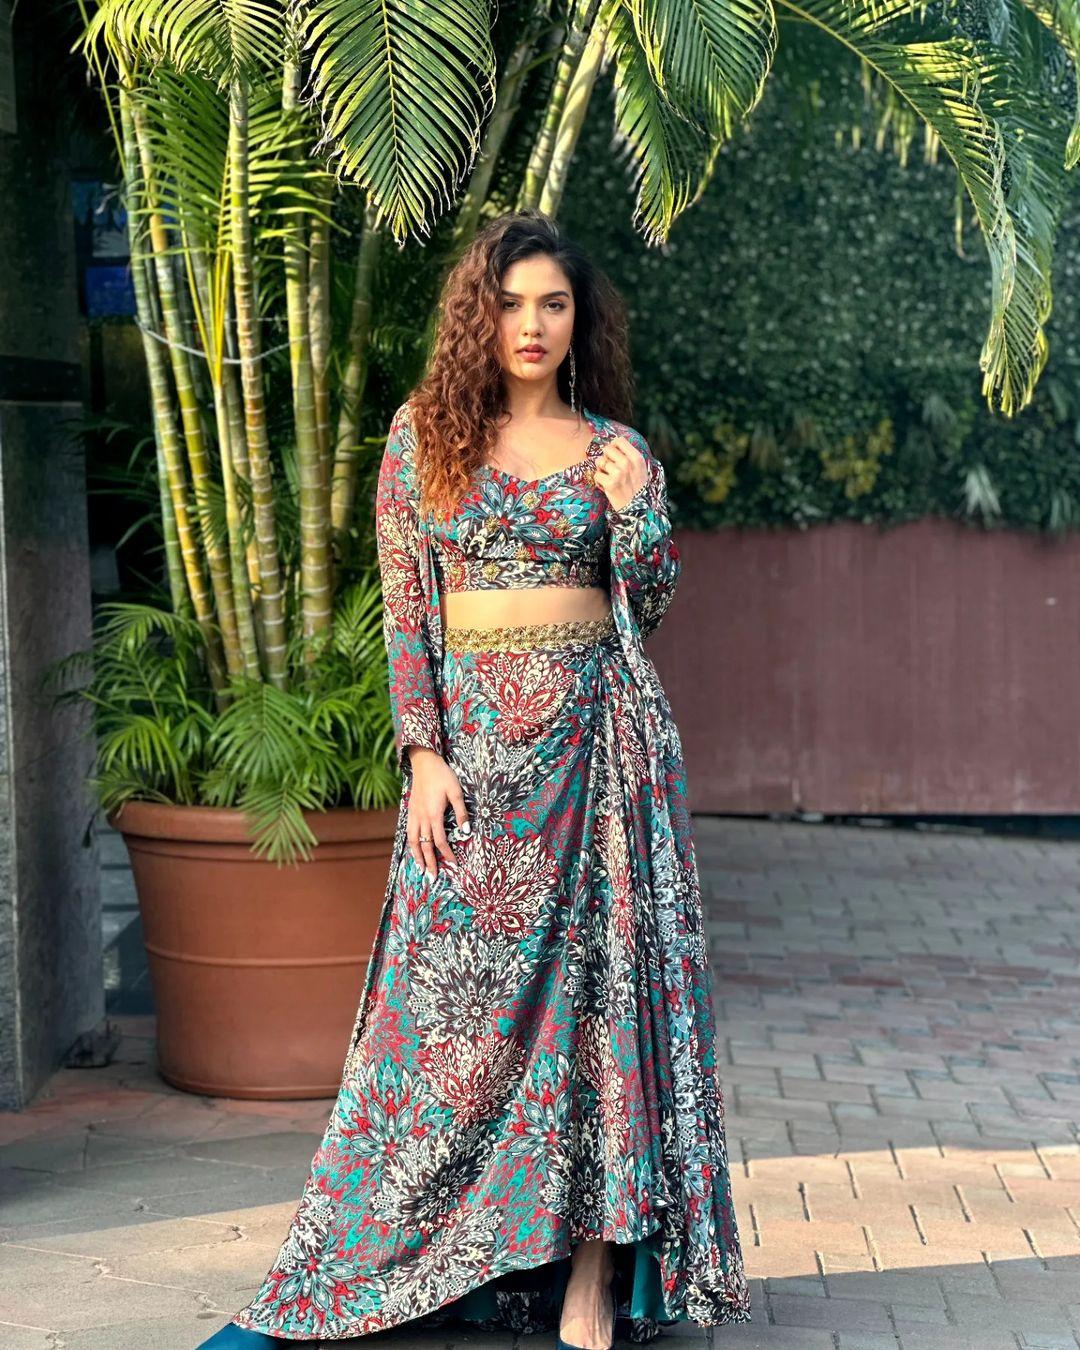 Divya donned this beautiful multicolour co-ord skirt set and added curls to her hair, which makes her look ravishing